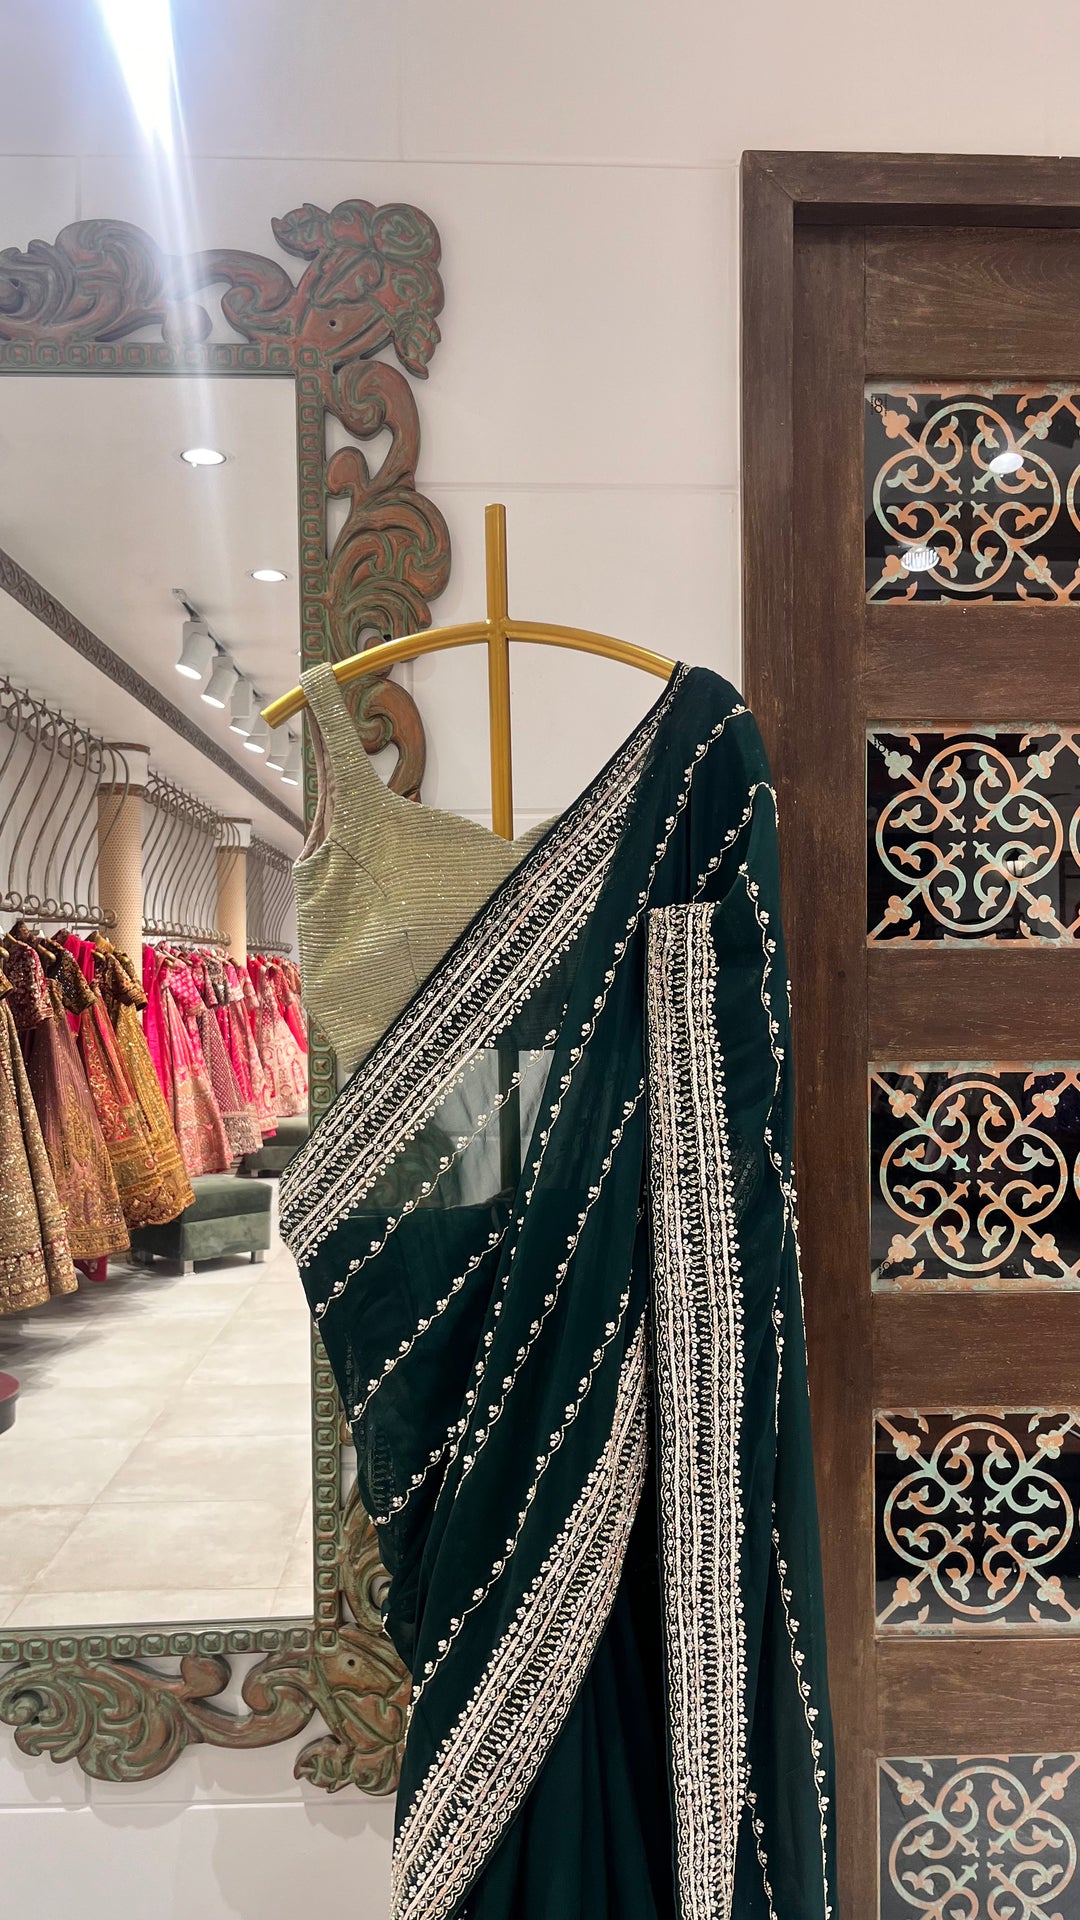 Green saree embellished with complementing gold work